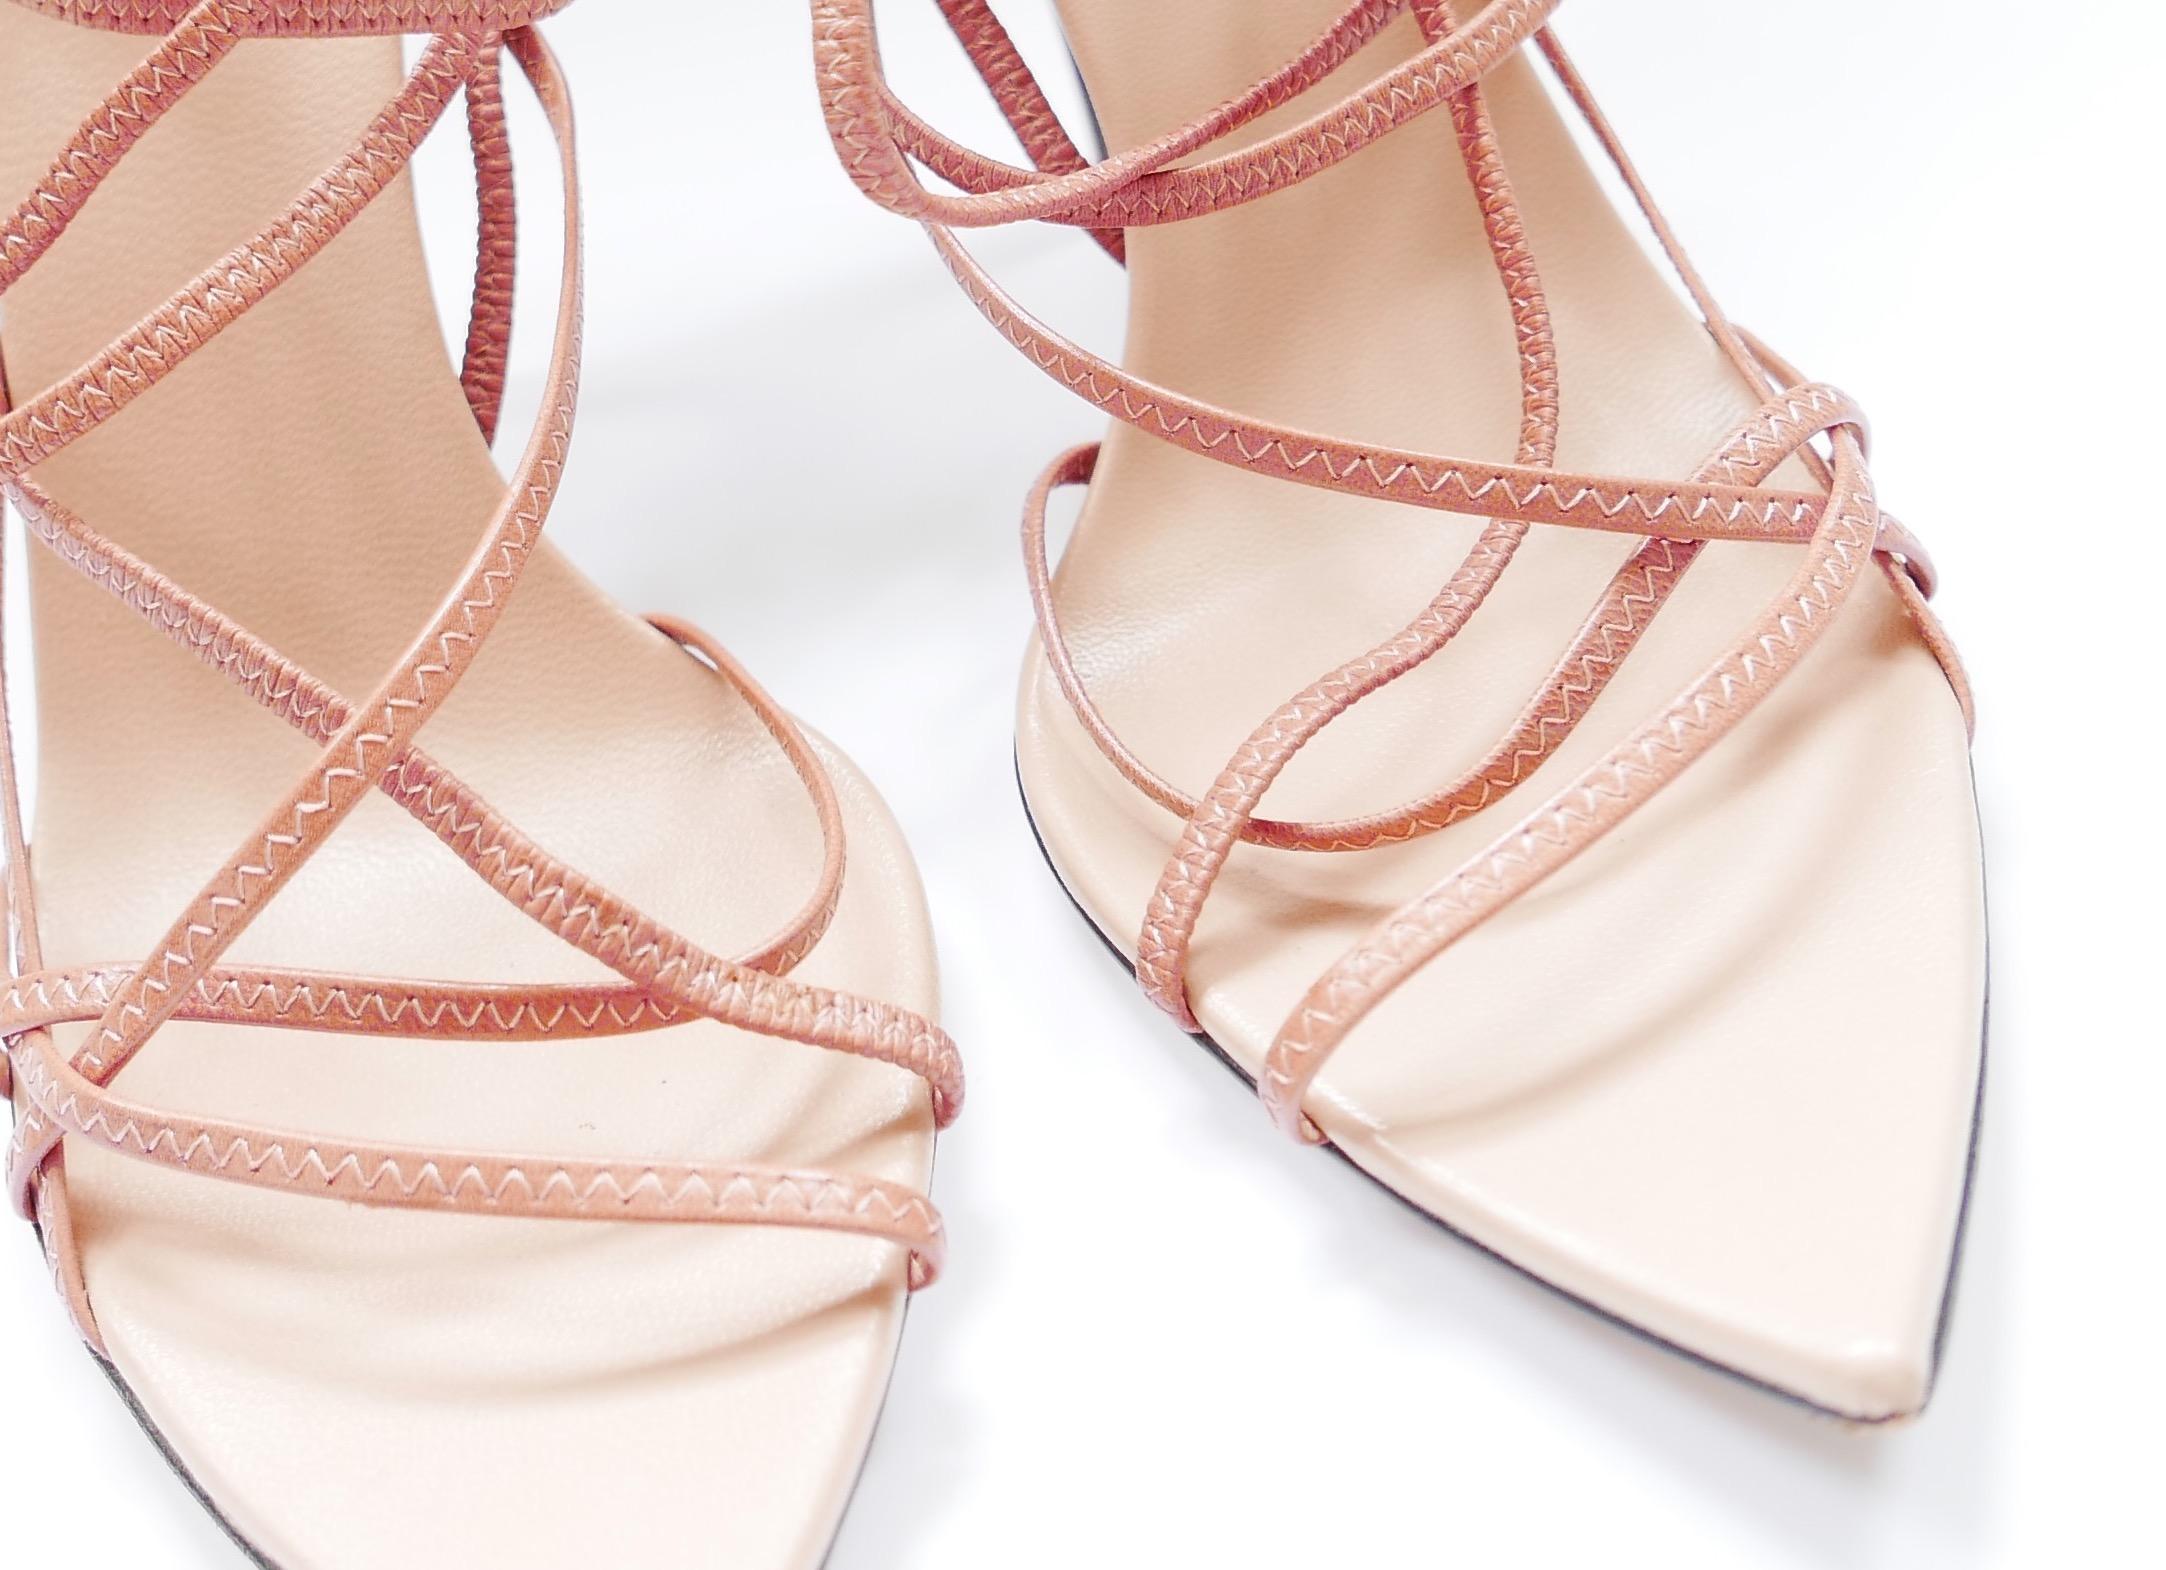 Gorgeous Gucci archival pointed sole strappy sandals in rose pink leather with multiple delicate, stretchy straps and stiletto heels. size 39C/UK6. Measures approx - 10.5” heel to toe and heel is 4.5”. Show lightest wear
